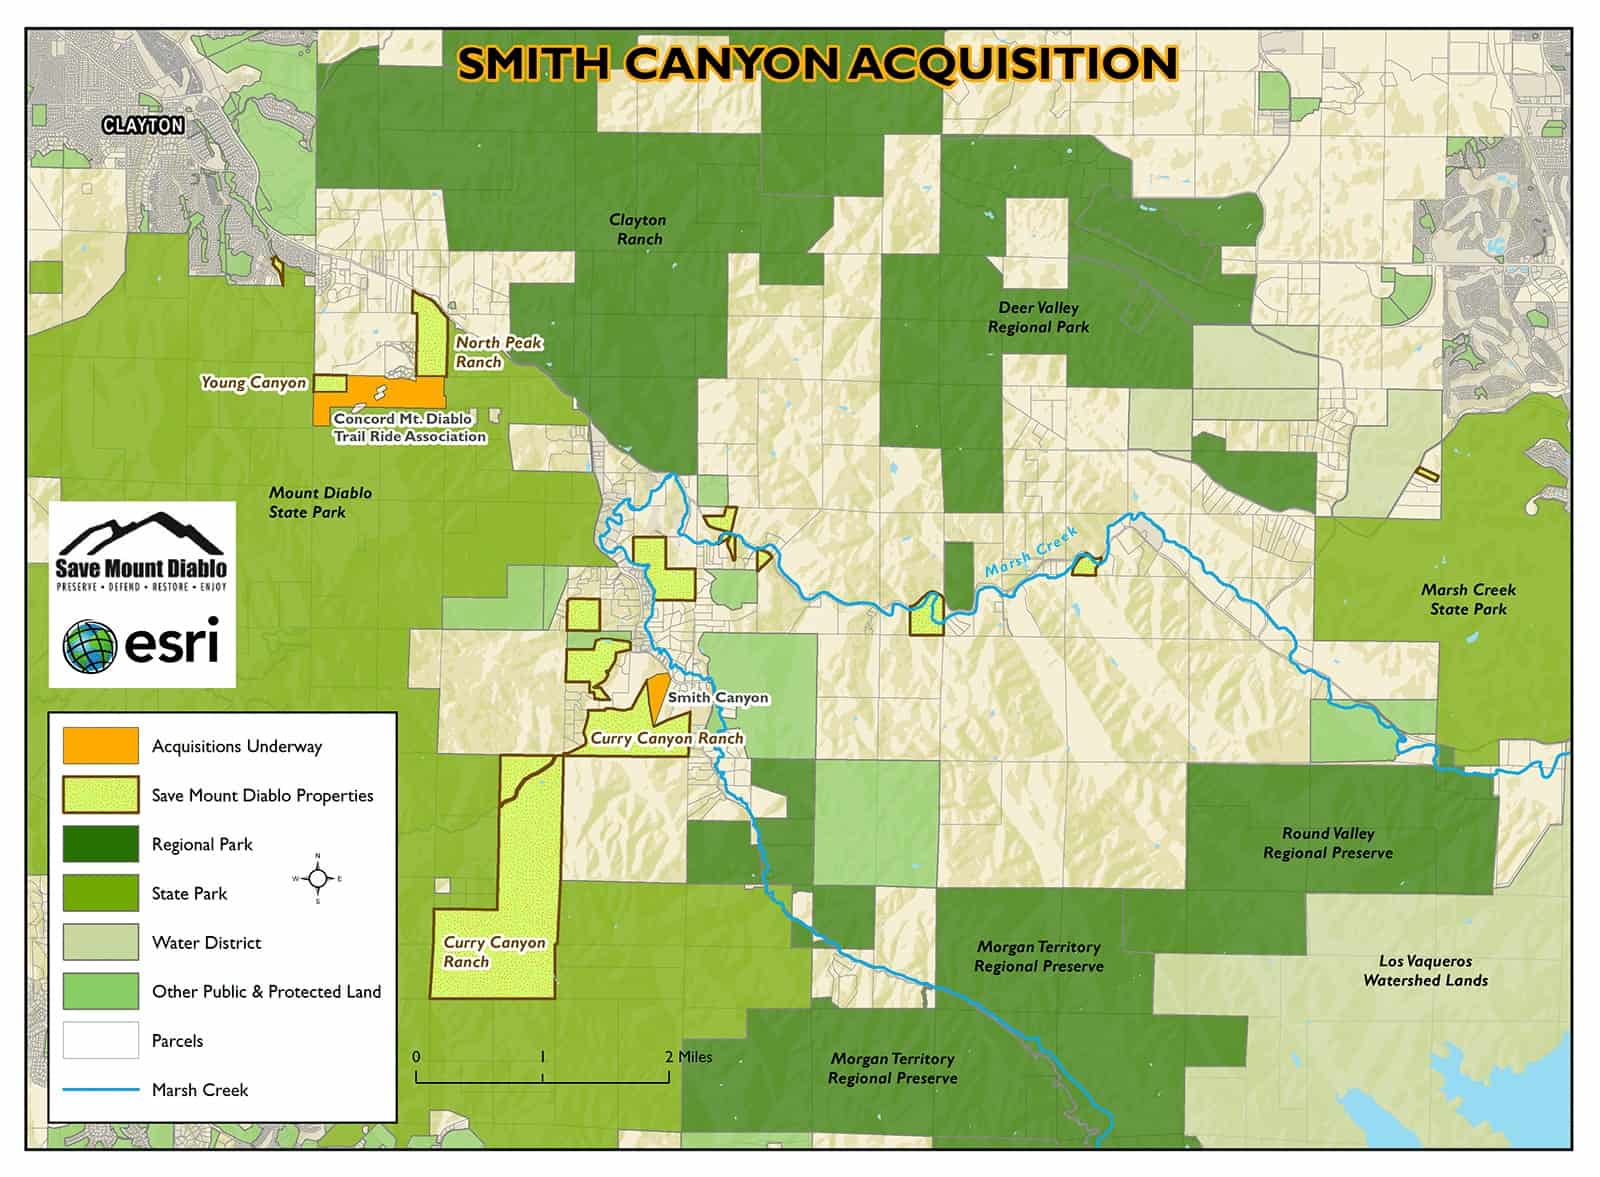 Map of Smith Canyon showing nearby protected lands and lands still at risk